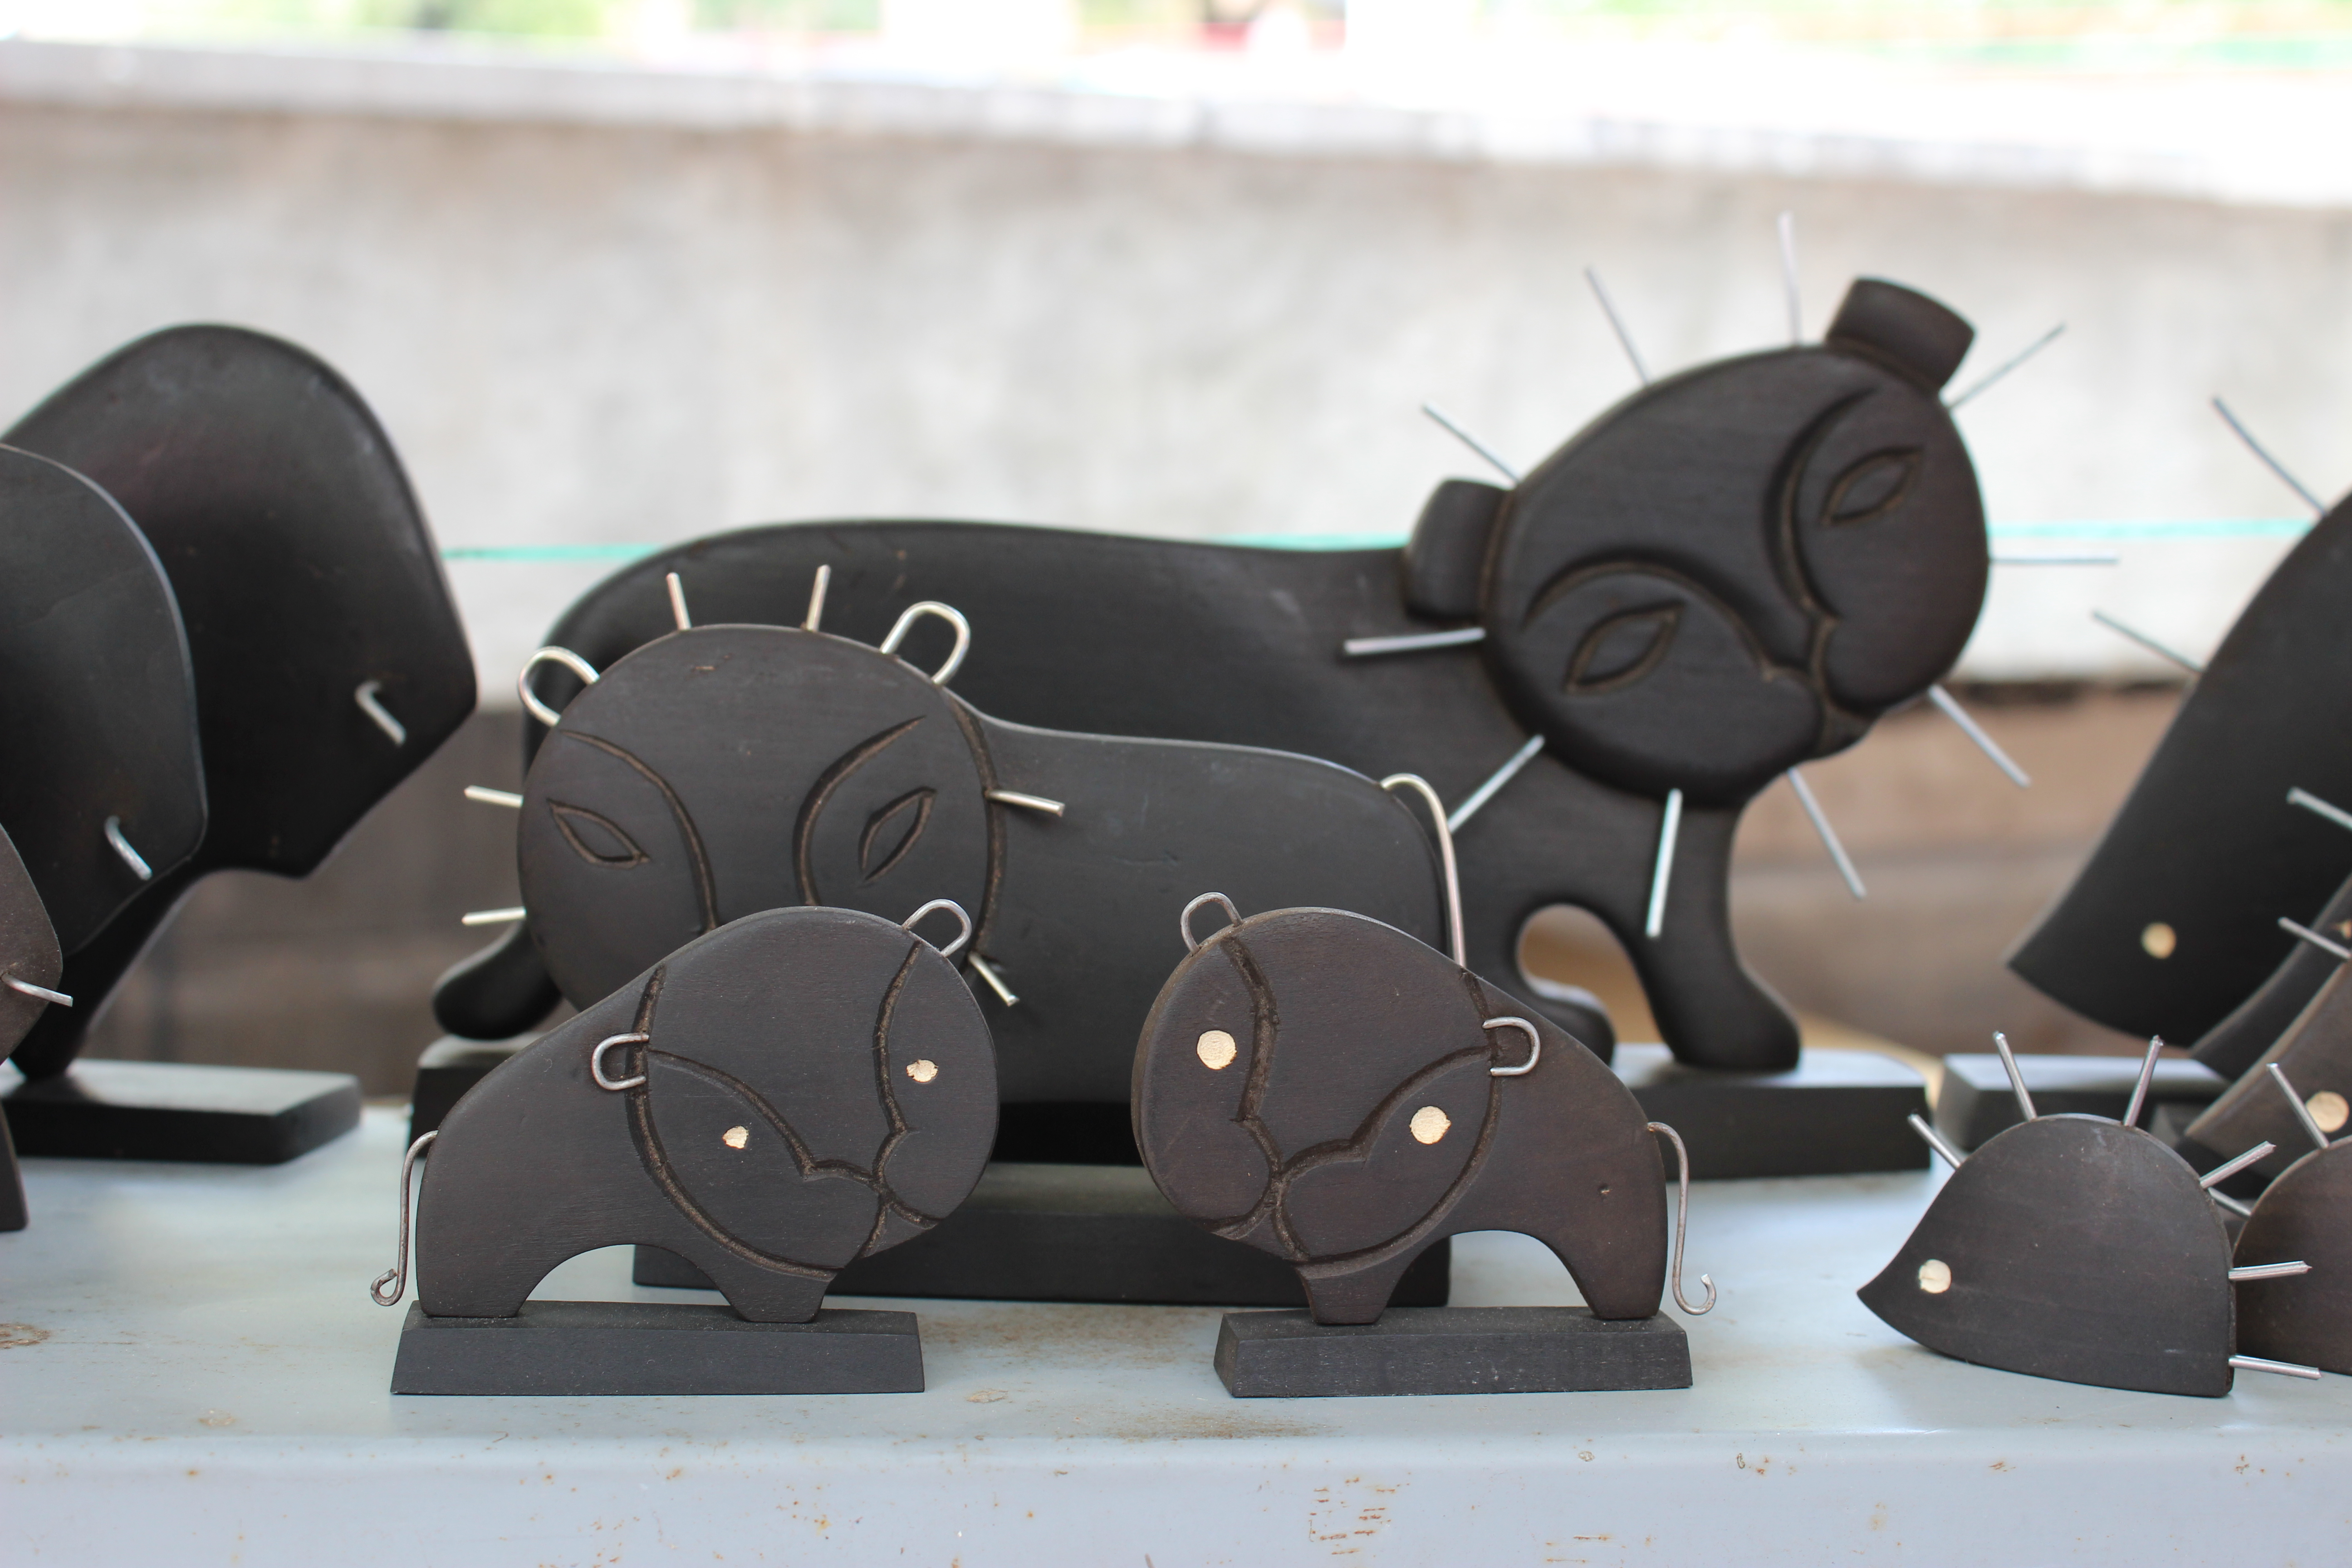 Again carvings! But now in contemporary style. What do you think about these cute little cats?